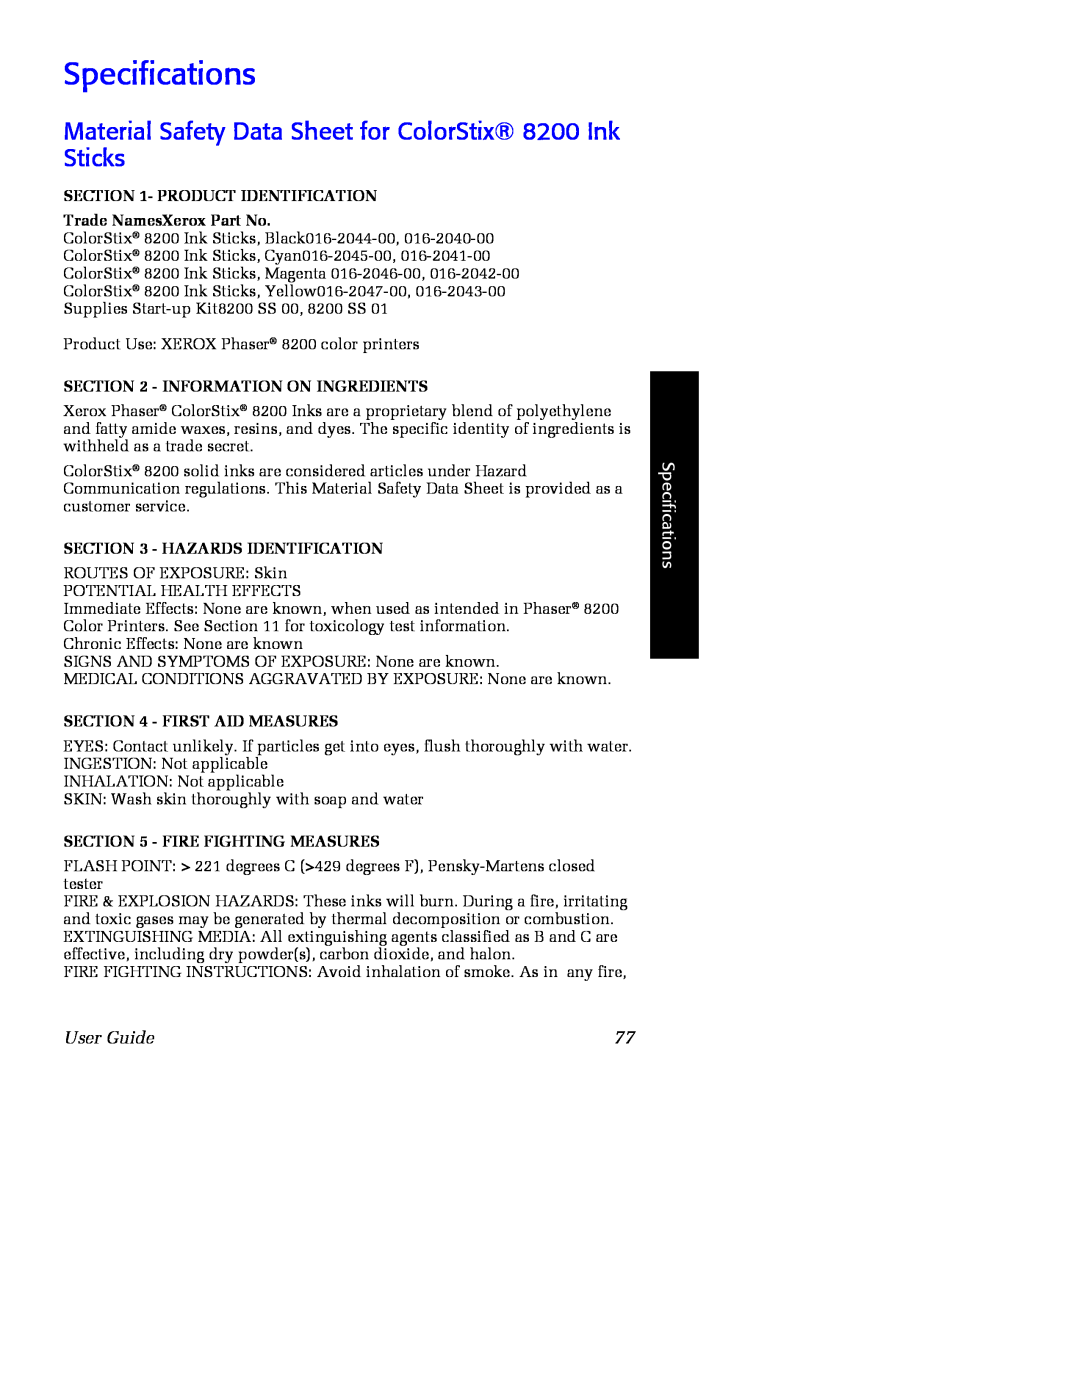 Xerox 016-2045-00 specifications Material Safety Data Sheet for ColorStix 8200 Ink Sticks, Specifications, User Guide 